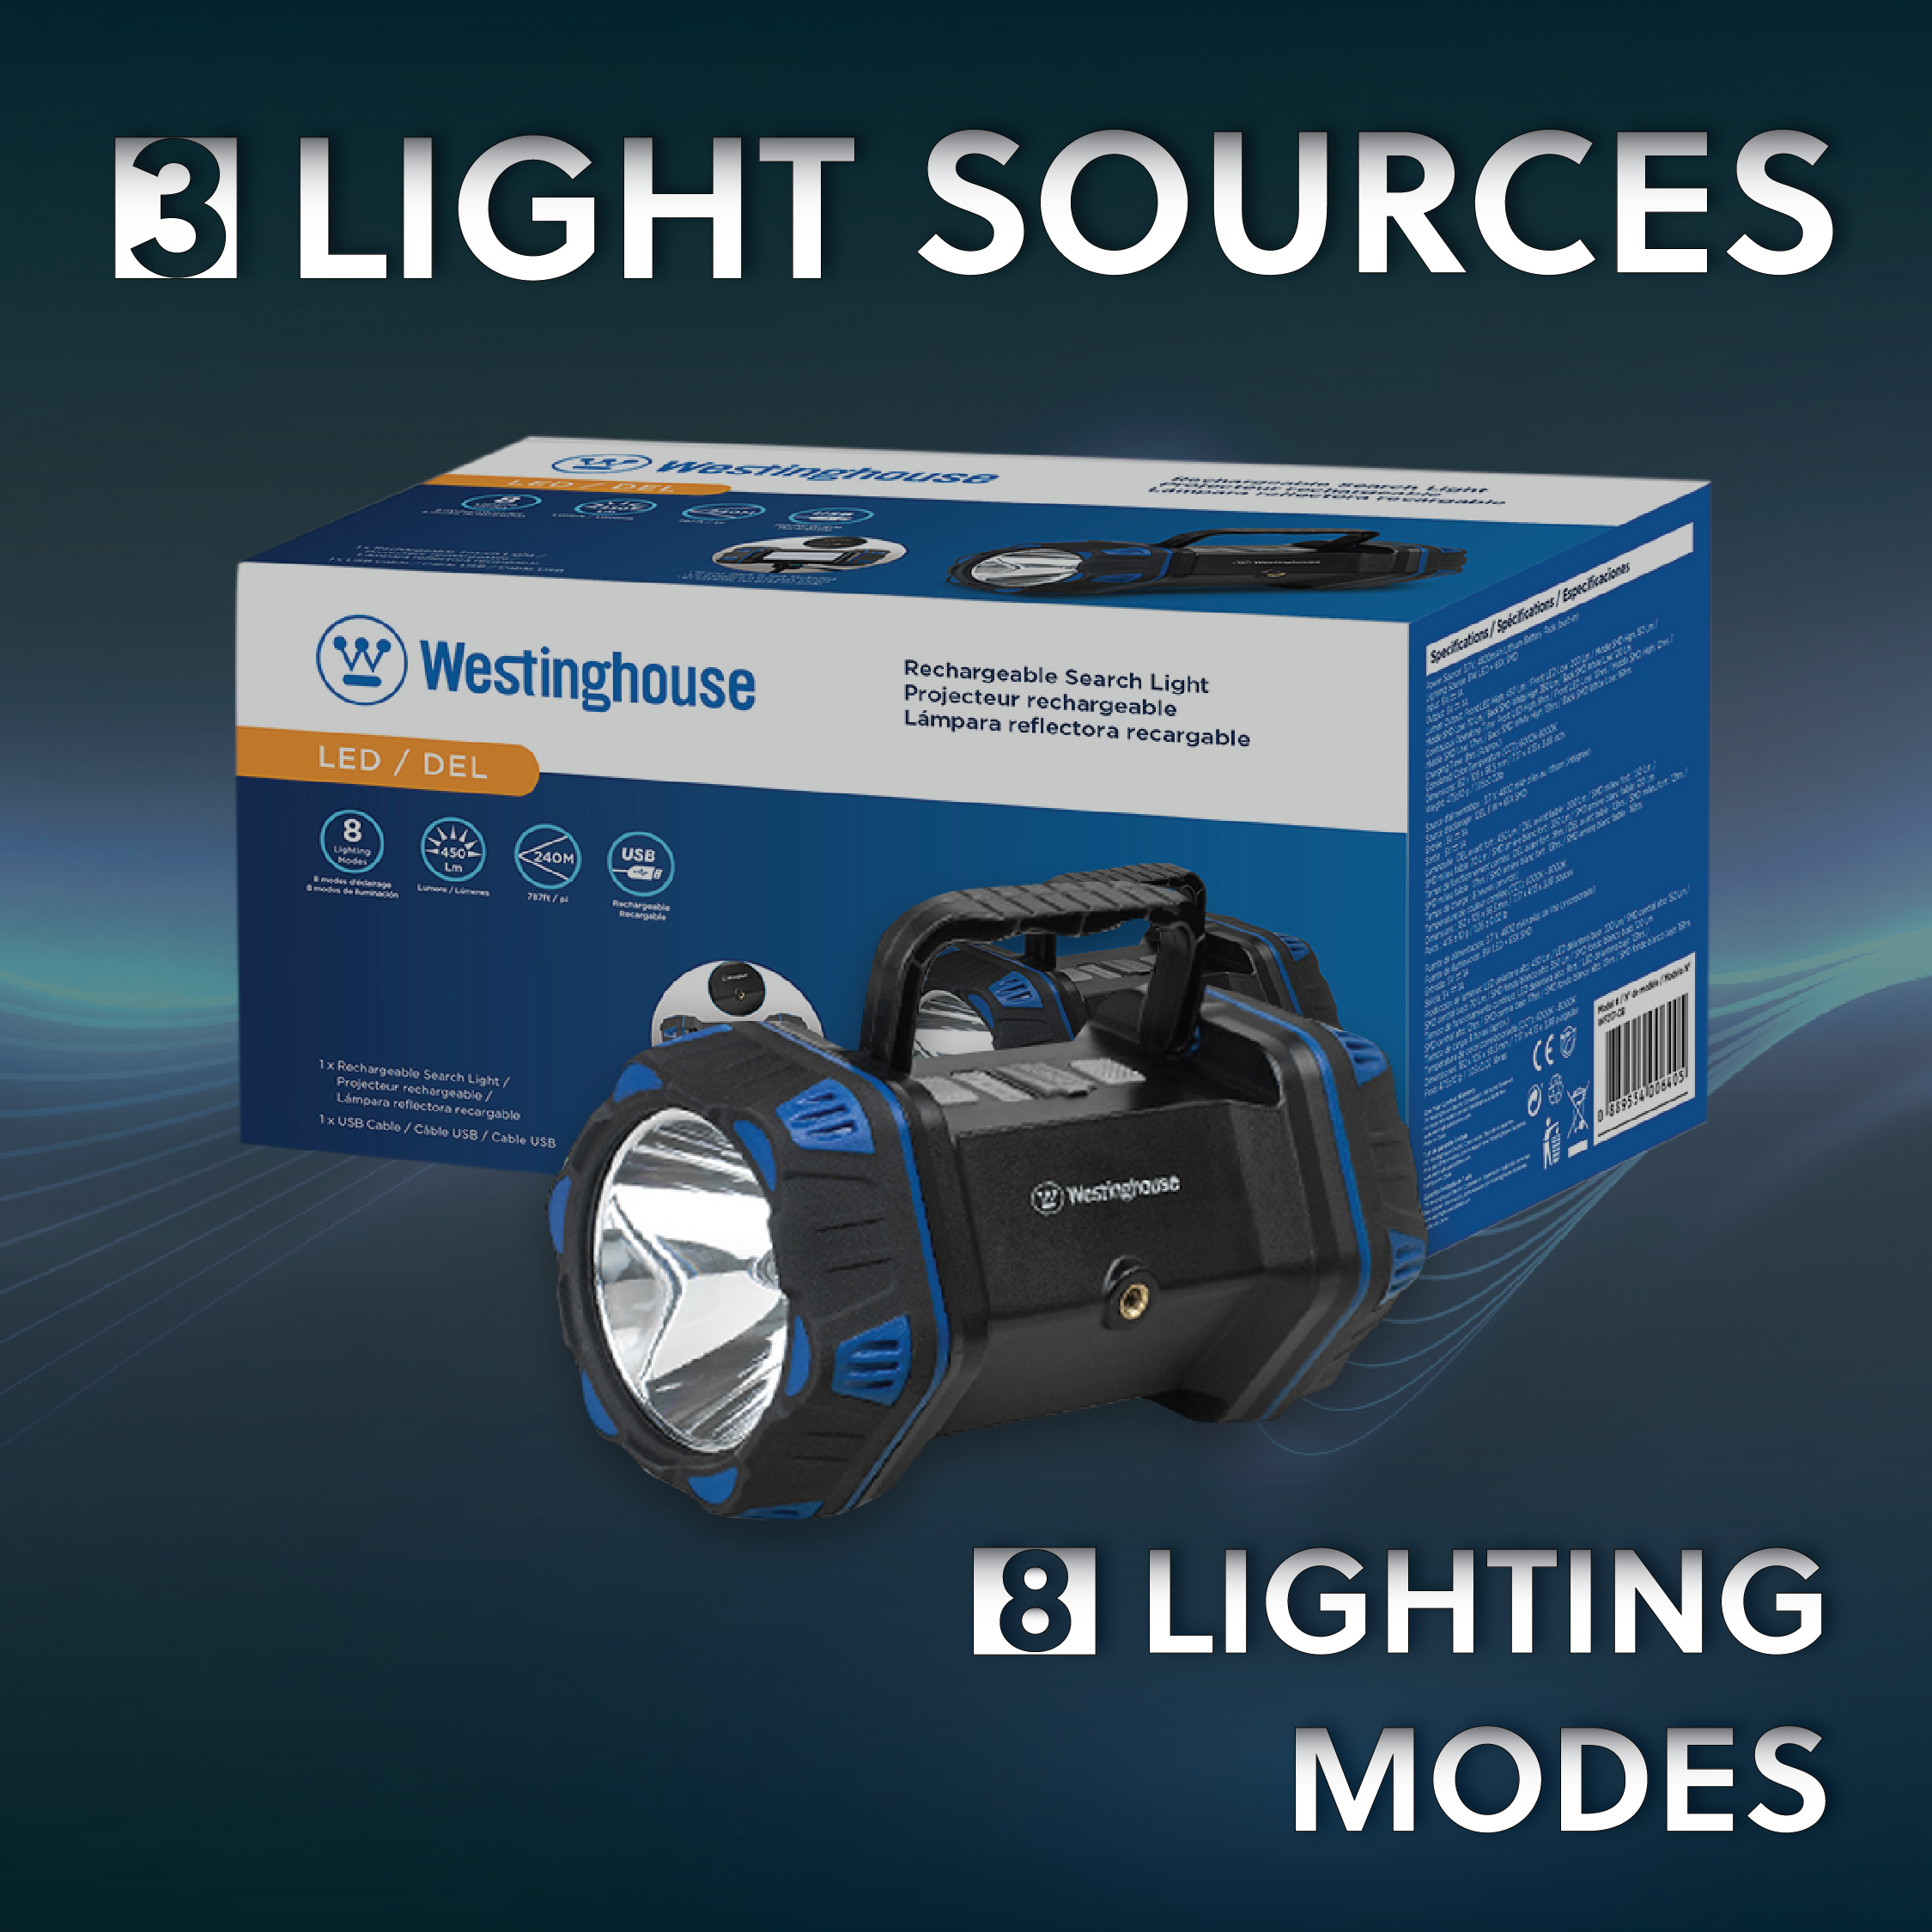 Westinghouse WF217 Rechargeable Search Light, Area Light, Mobile Power Bank - 8 Lighting Modes